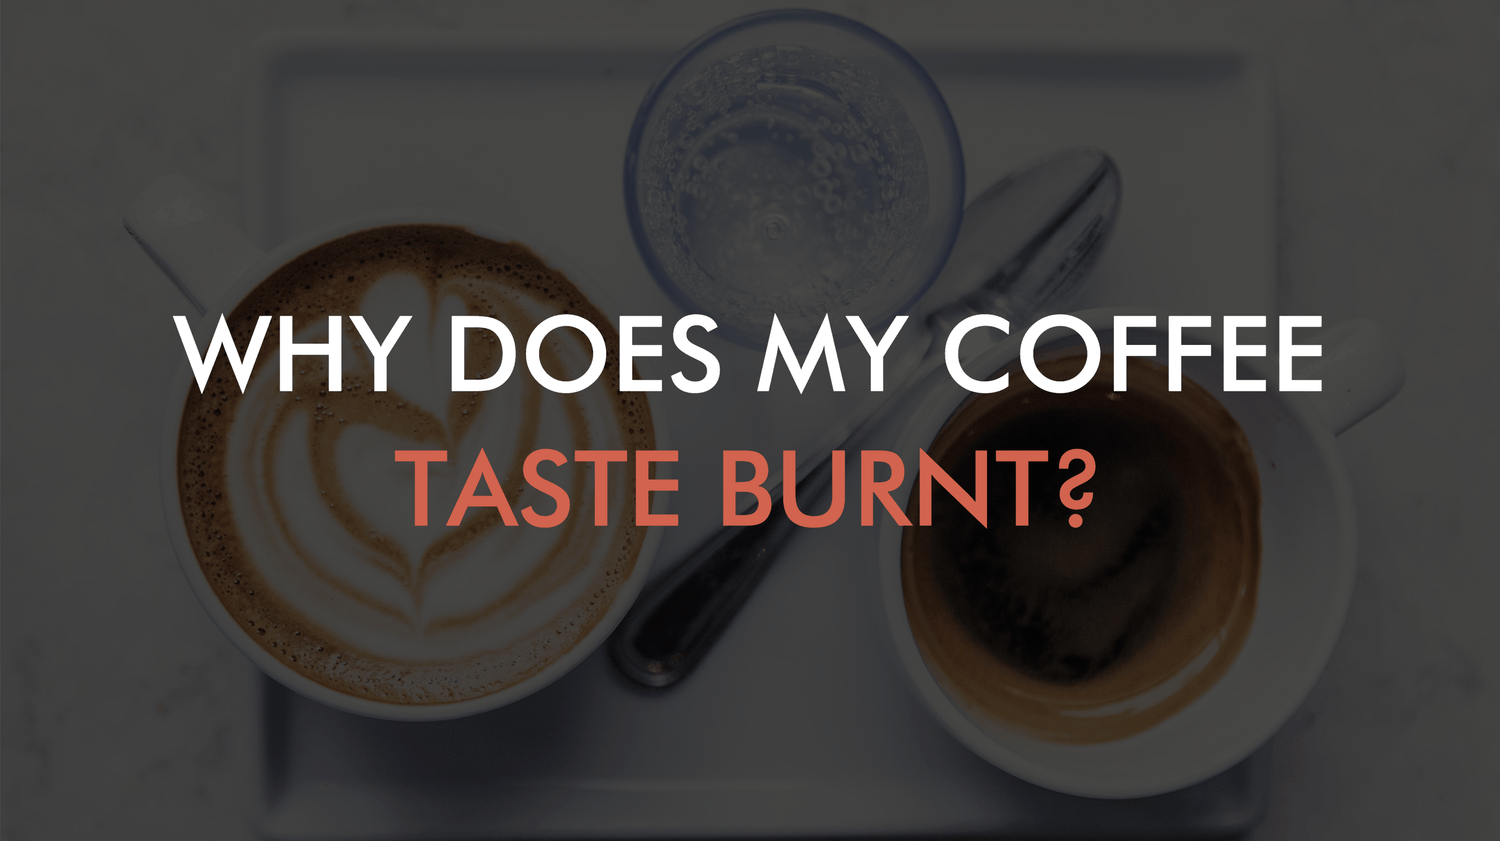 why does my coffee taste burnt title image